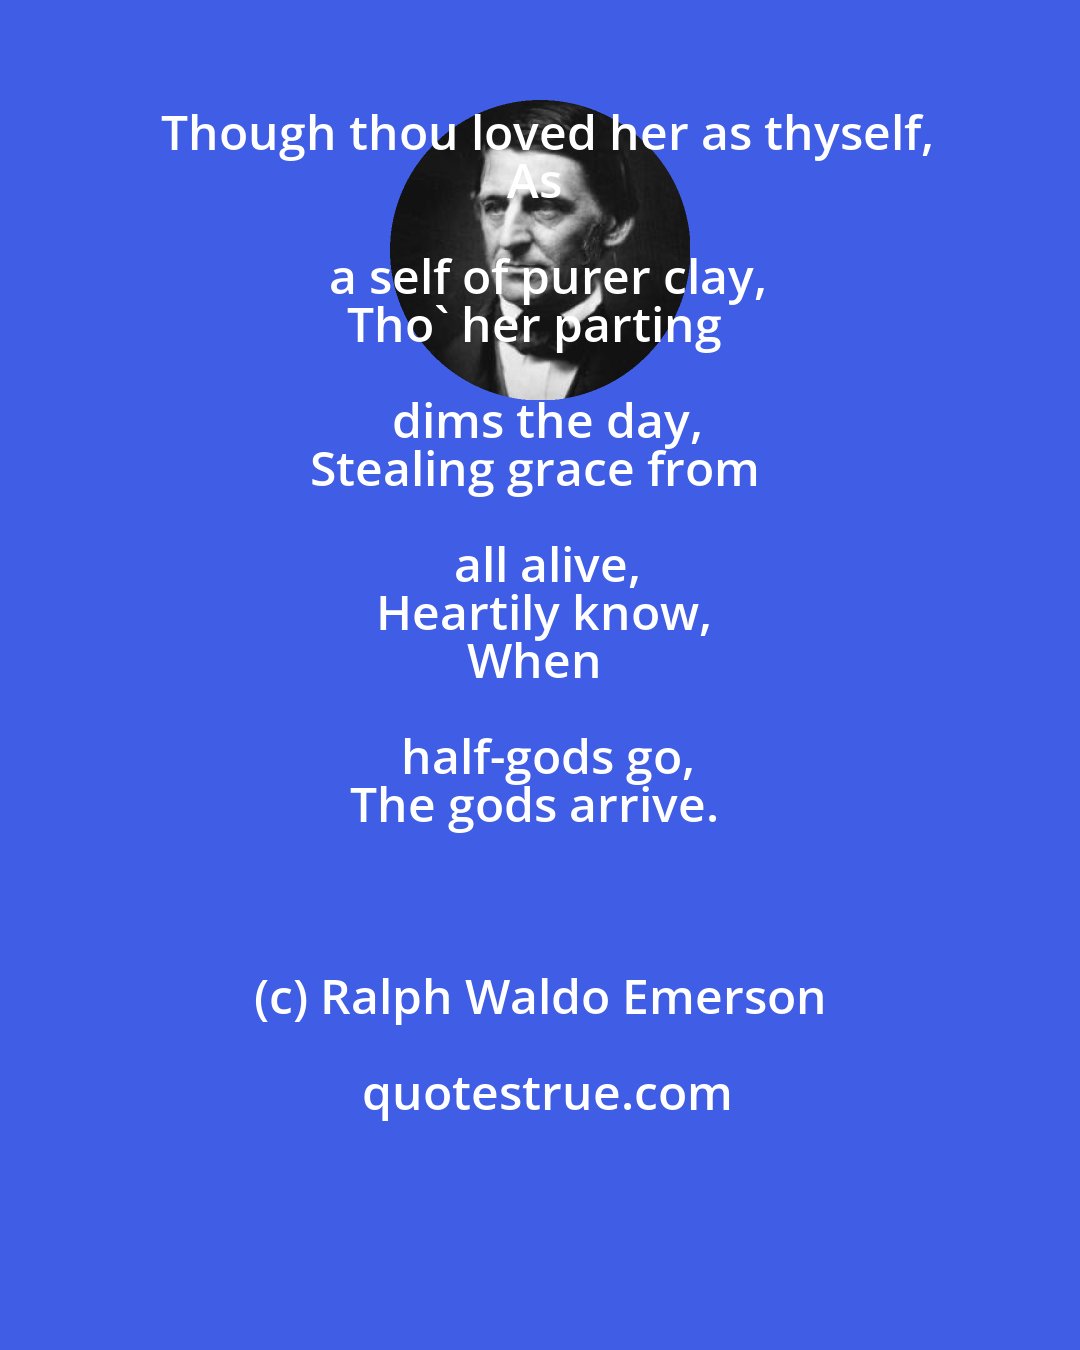 Ralph Waldo Emerson: Though thou loved her as thyself,
As a self of purer clay,
Tho' her parting dims the day,
Stealing grace from all alive,
Heartily know,
When half-gods go,
The gods arrive.